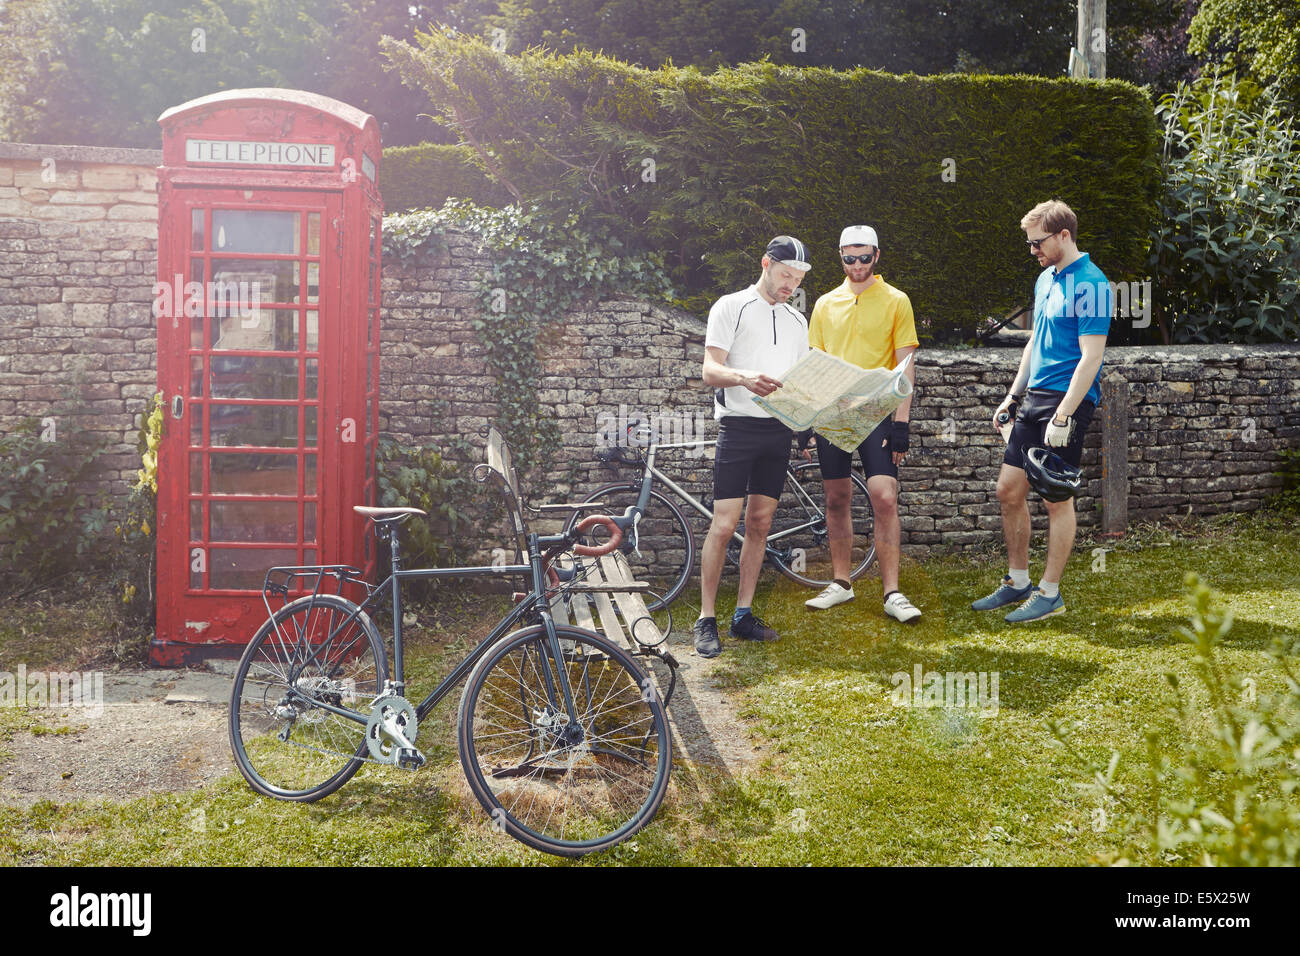 Cyclists map reading by red telephone box, Cotswolds, UK Stock Photo